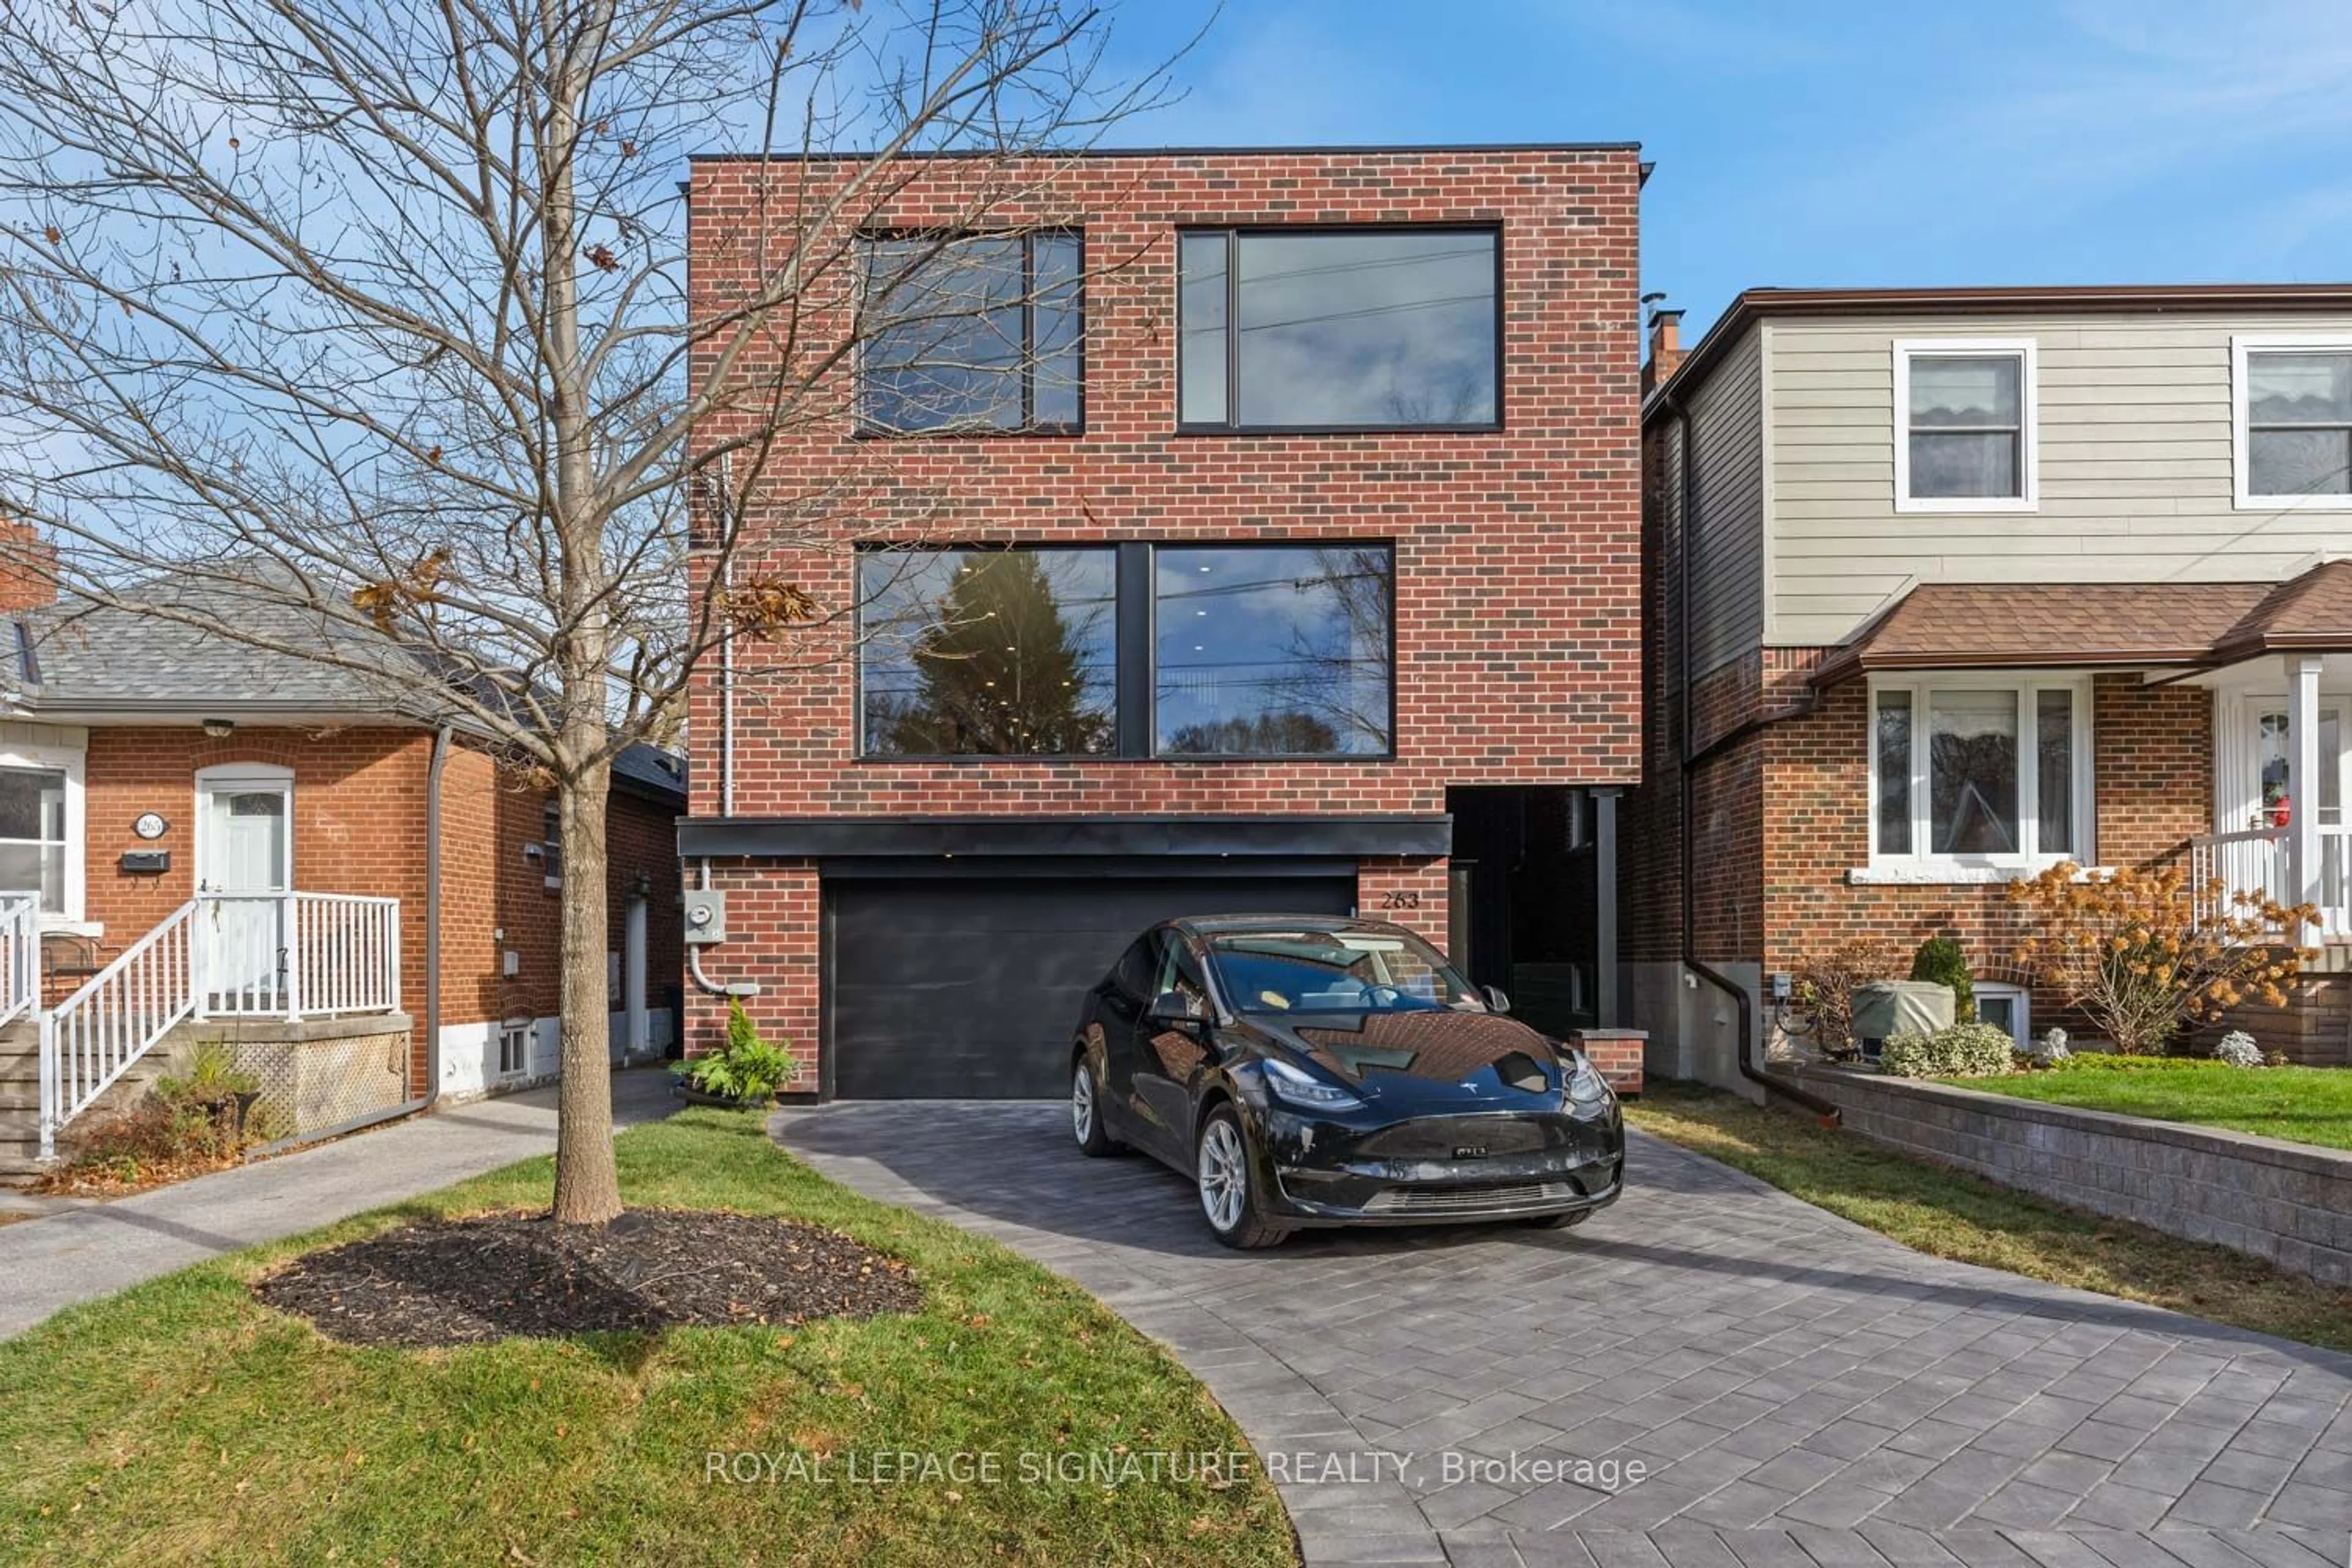 Home with brick exterior material for 263 Blantyre Ave, Toronto Ontario M1N 2S2